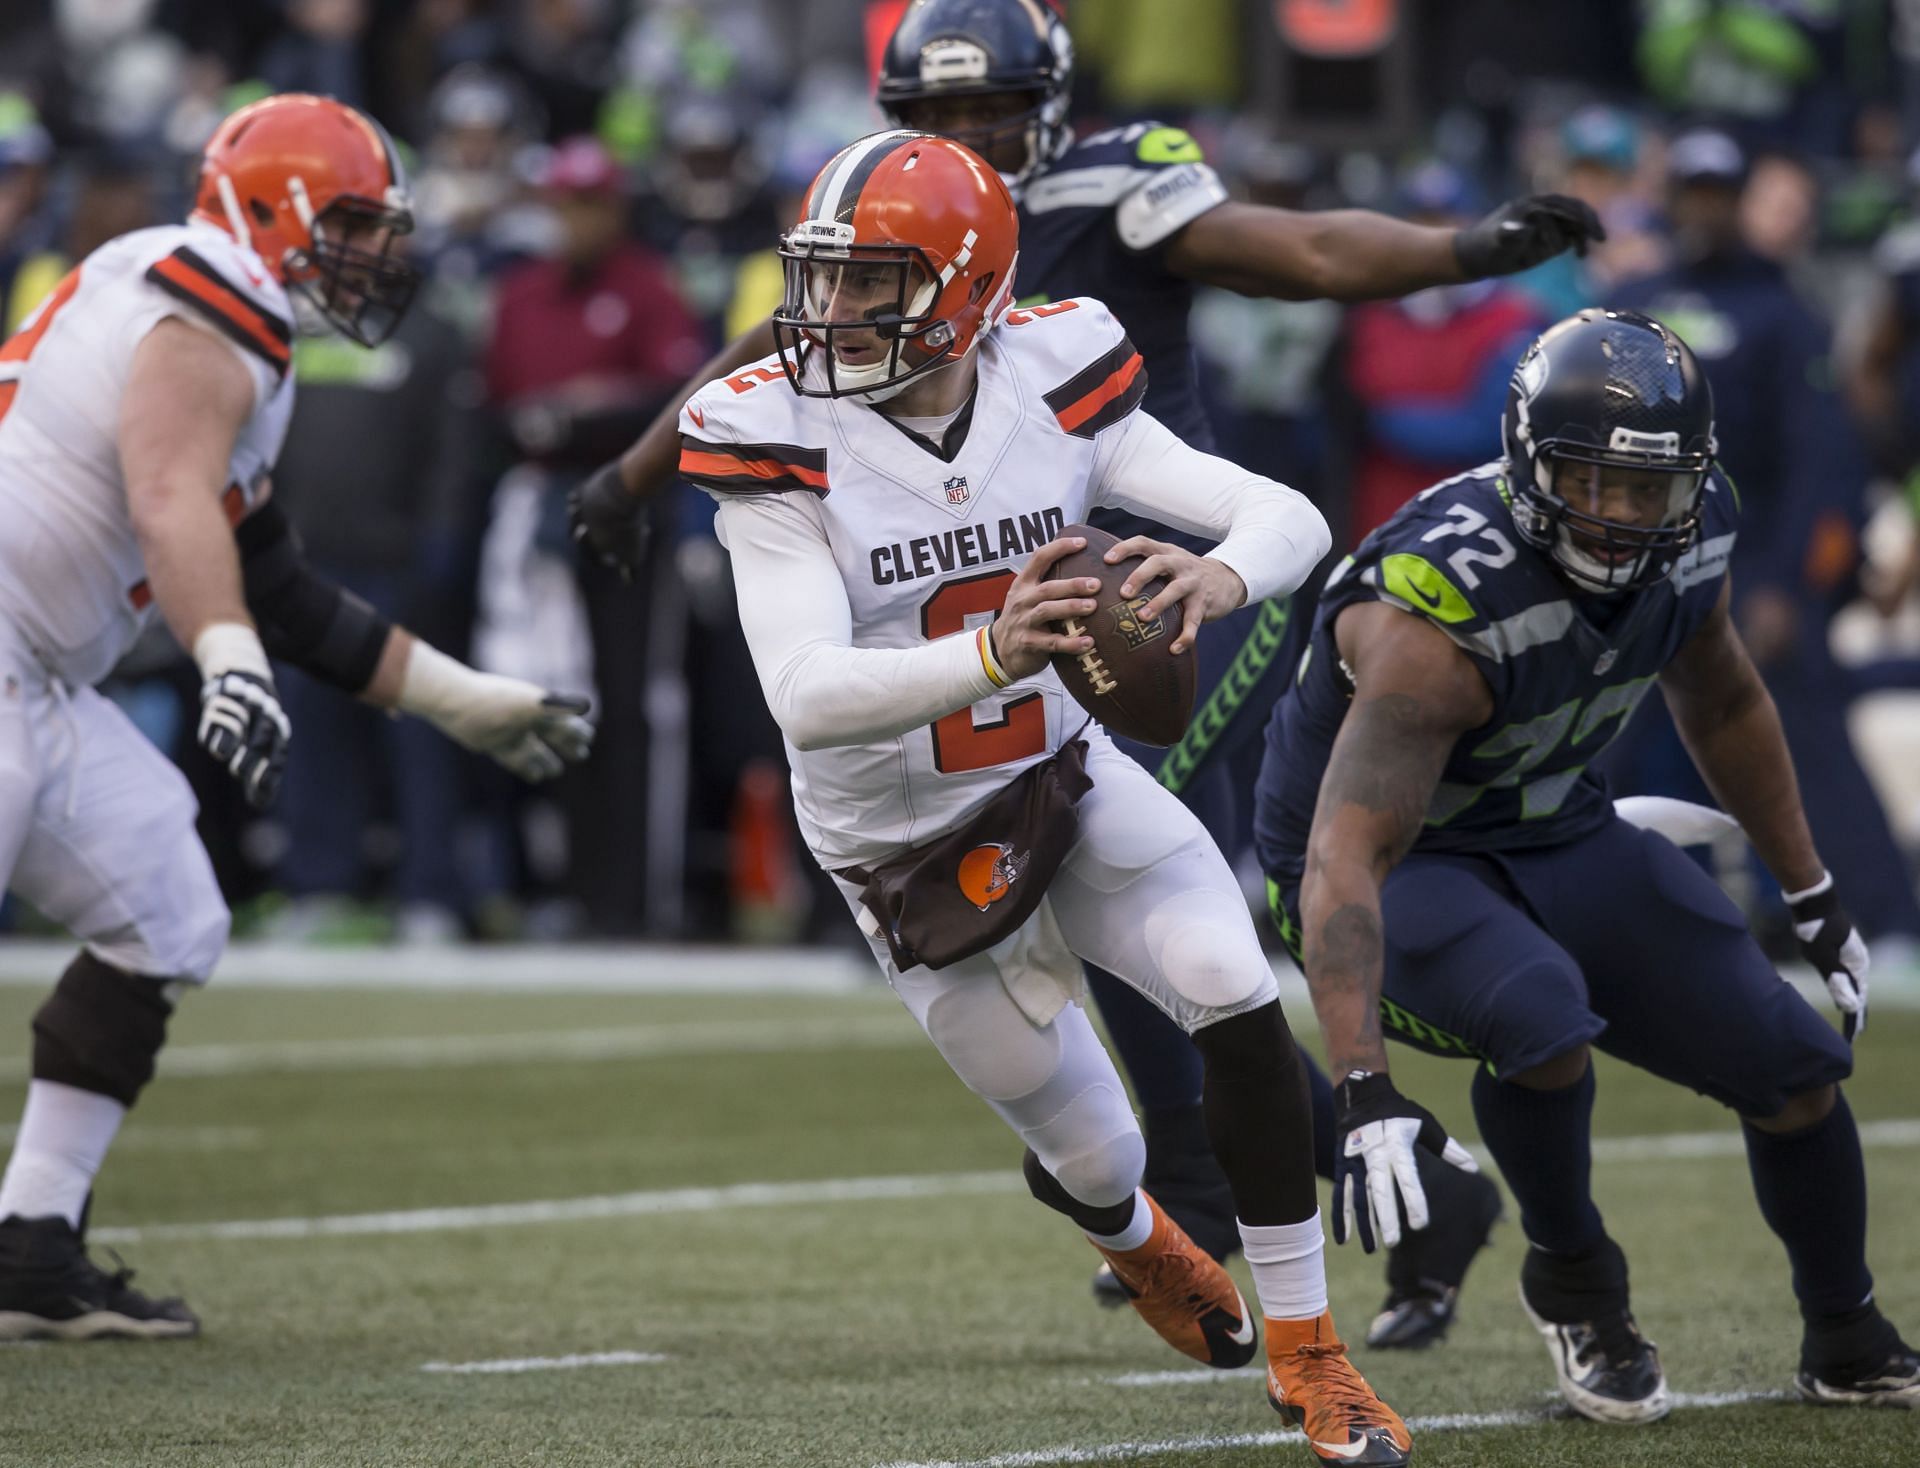 Johnny Manziel: Cleveland Browns vs Seattle Seahawks